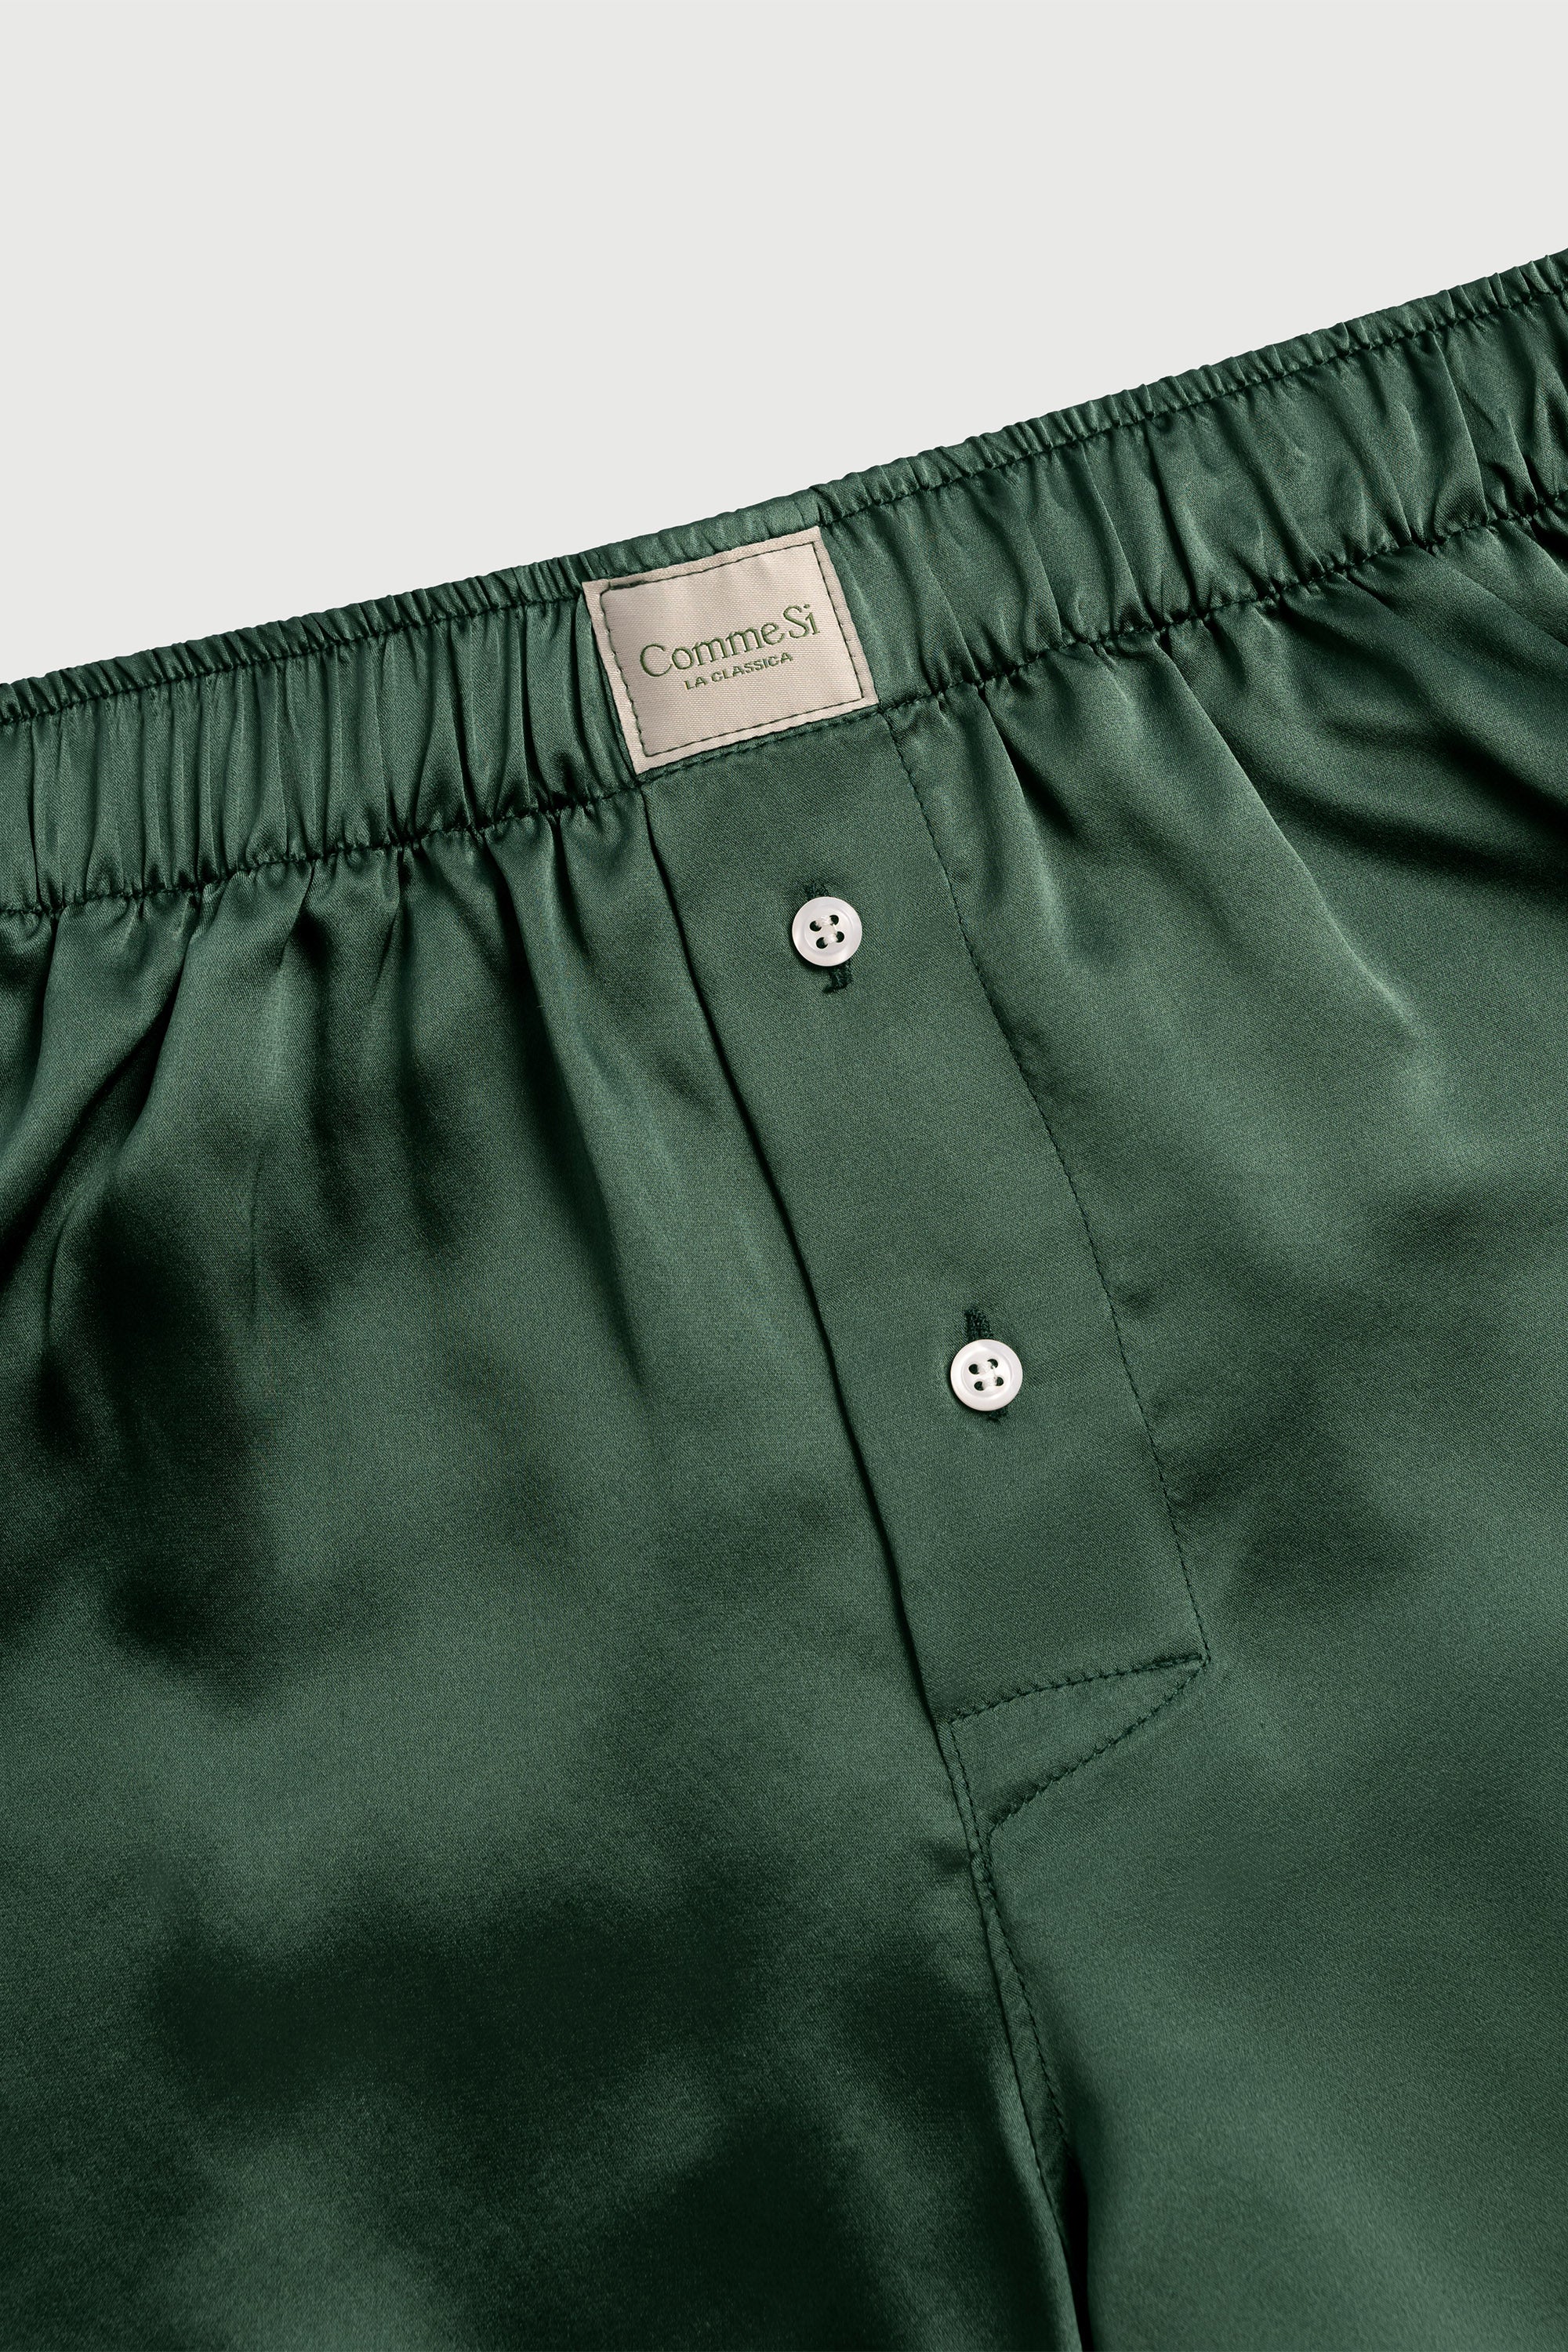 waistband detail, La Boxer Classica, Silk, Forest, Comme Si